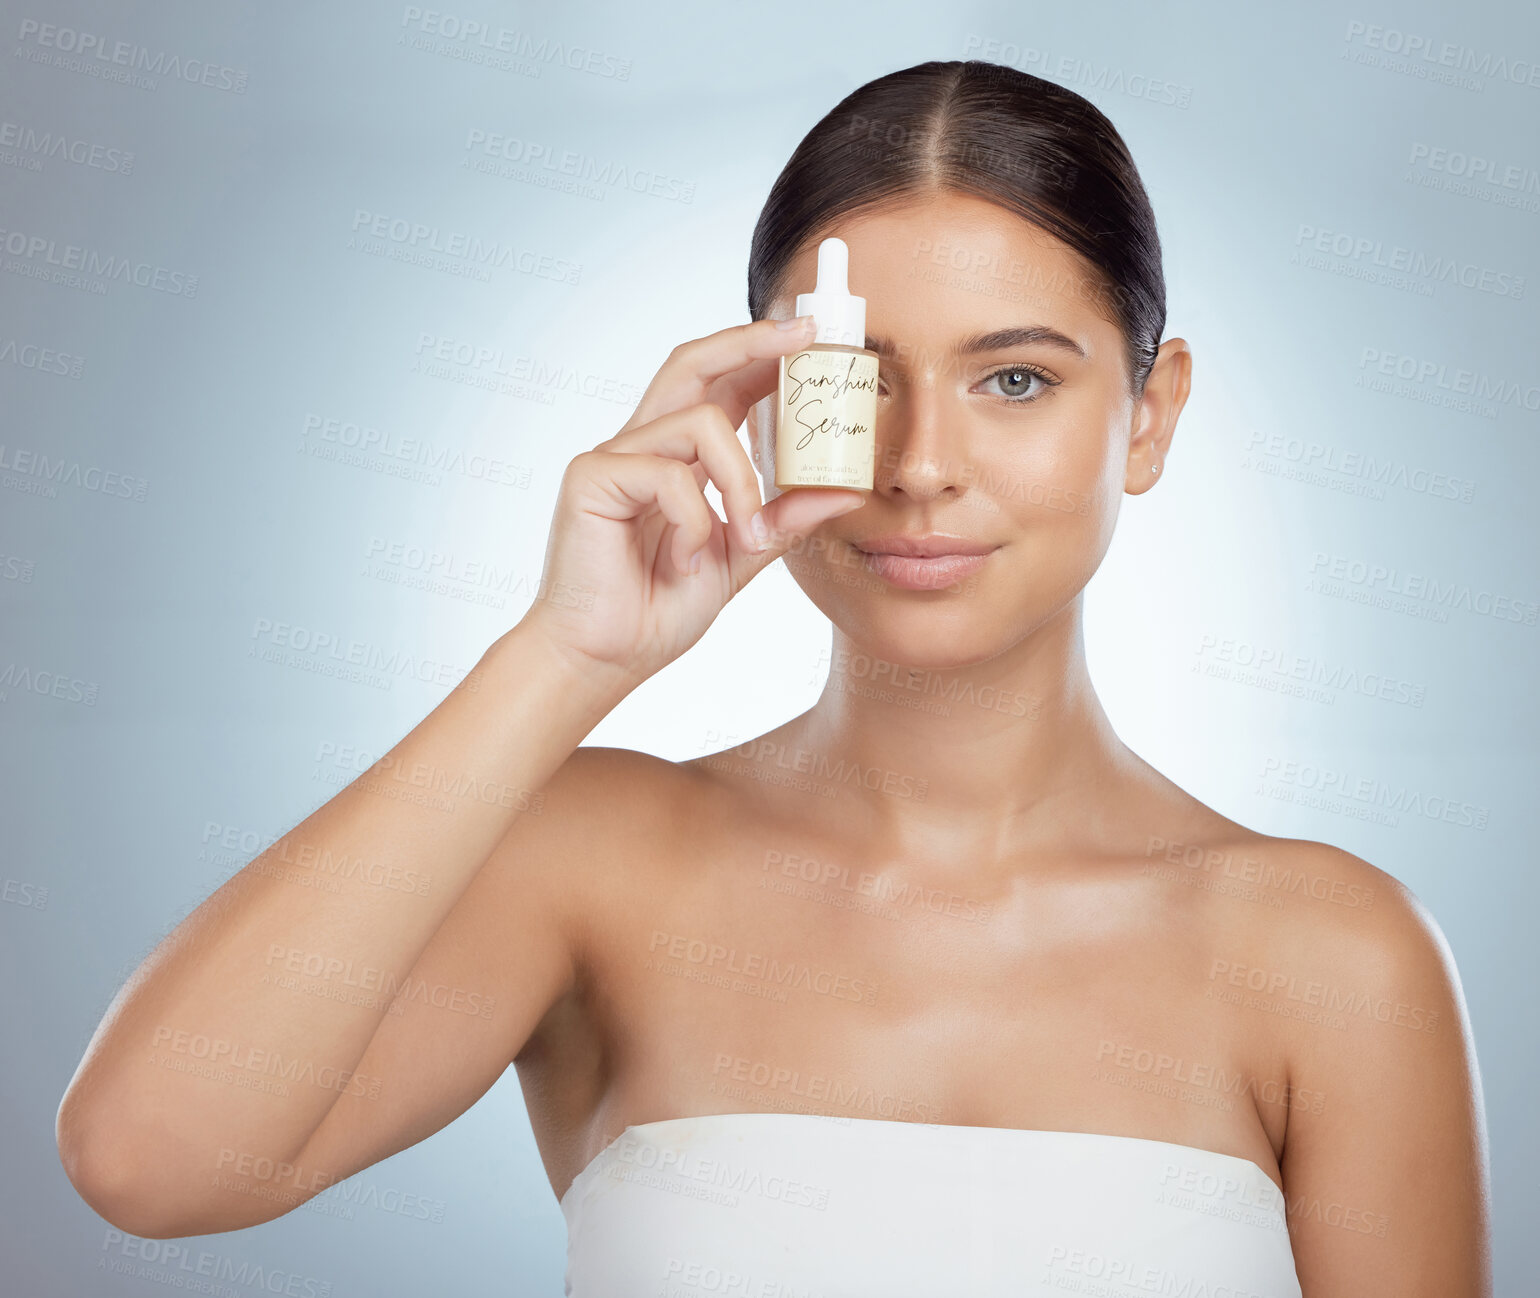 Buy stock photo Portrait of beautiful woman holding face serum over eye while posing with copyspace. Young caucasian model isolated against grey studio background. Using skin oil for healthy glowing skincare routine